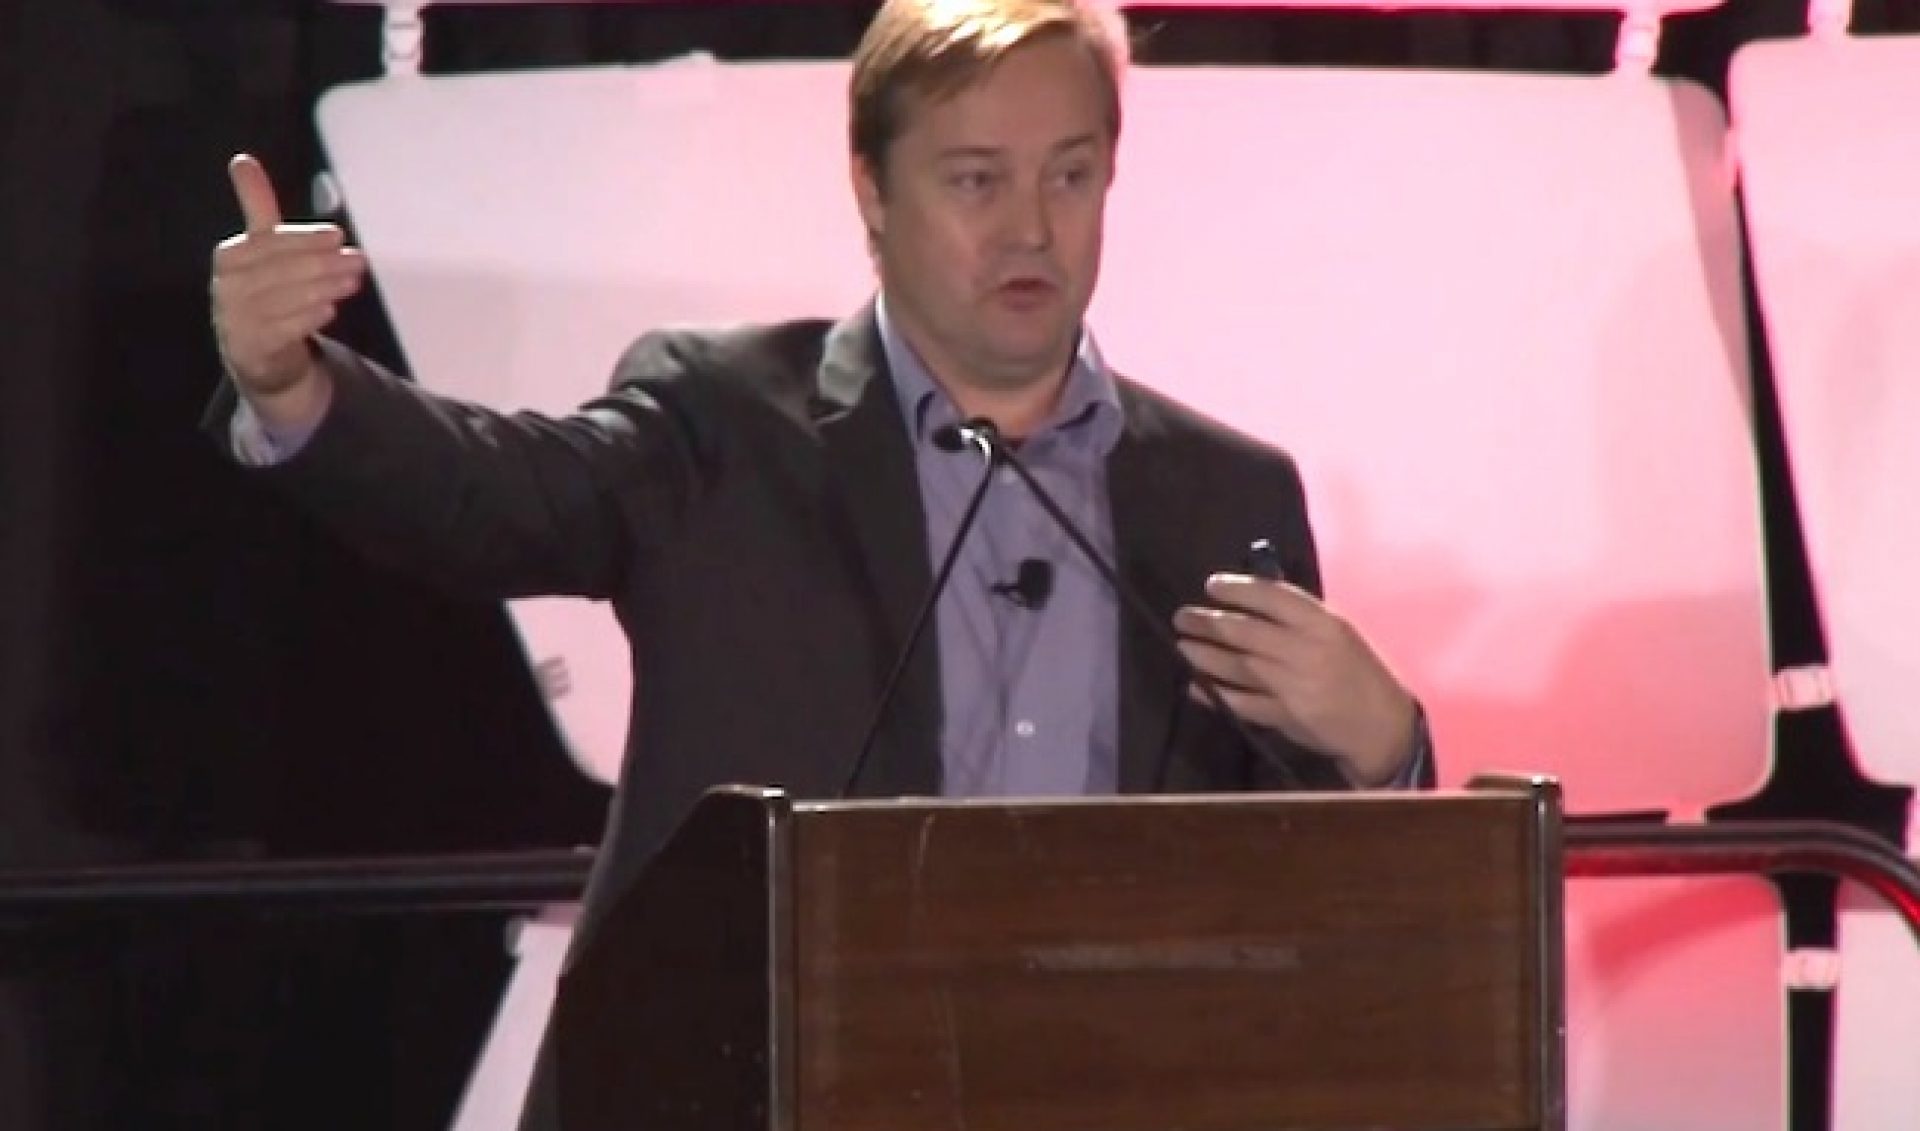 Jason Calacanis At Vidcon: Hey @YouTube, Can We Get A New Deal?